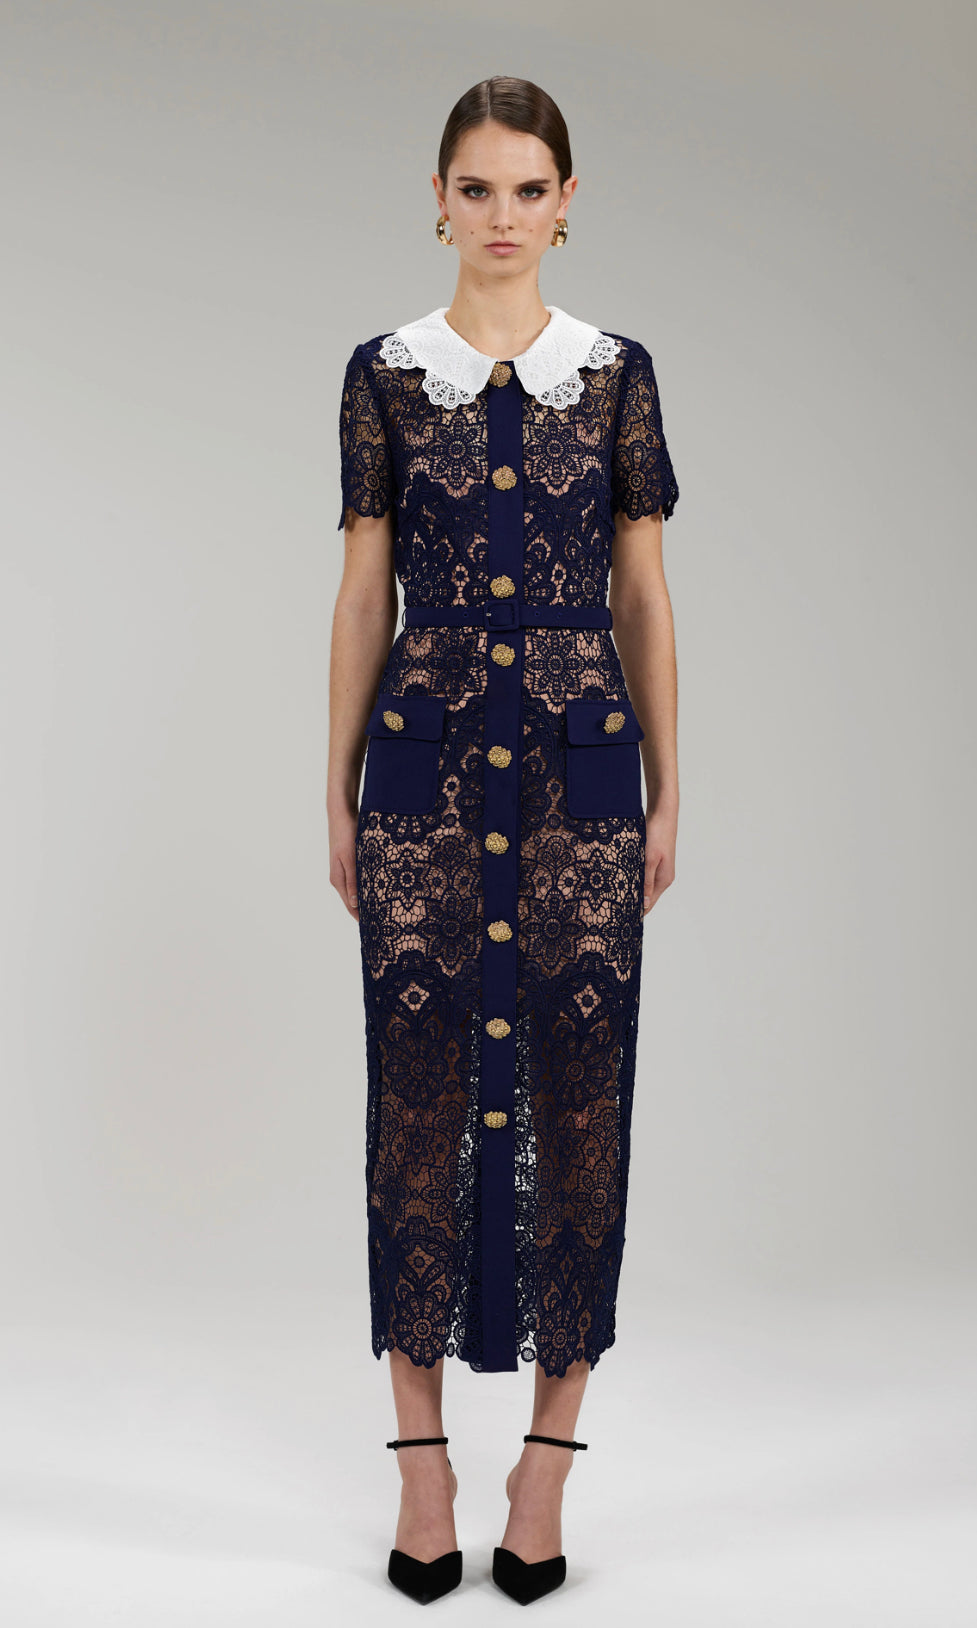 SP Navy Floral Guipure Lace Collar Midi Dress